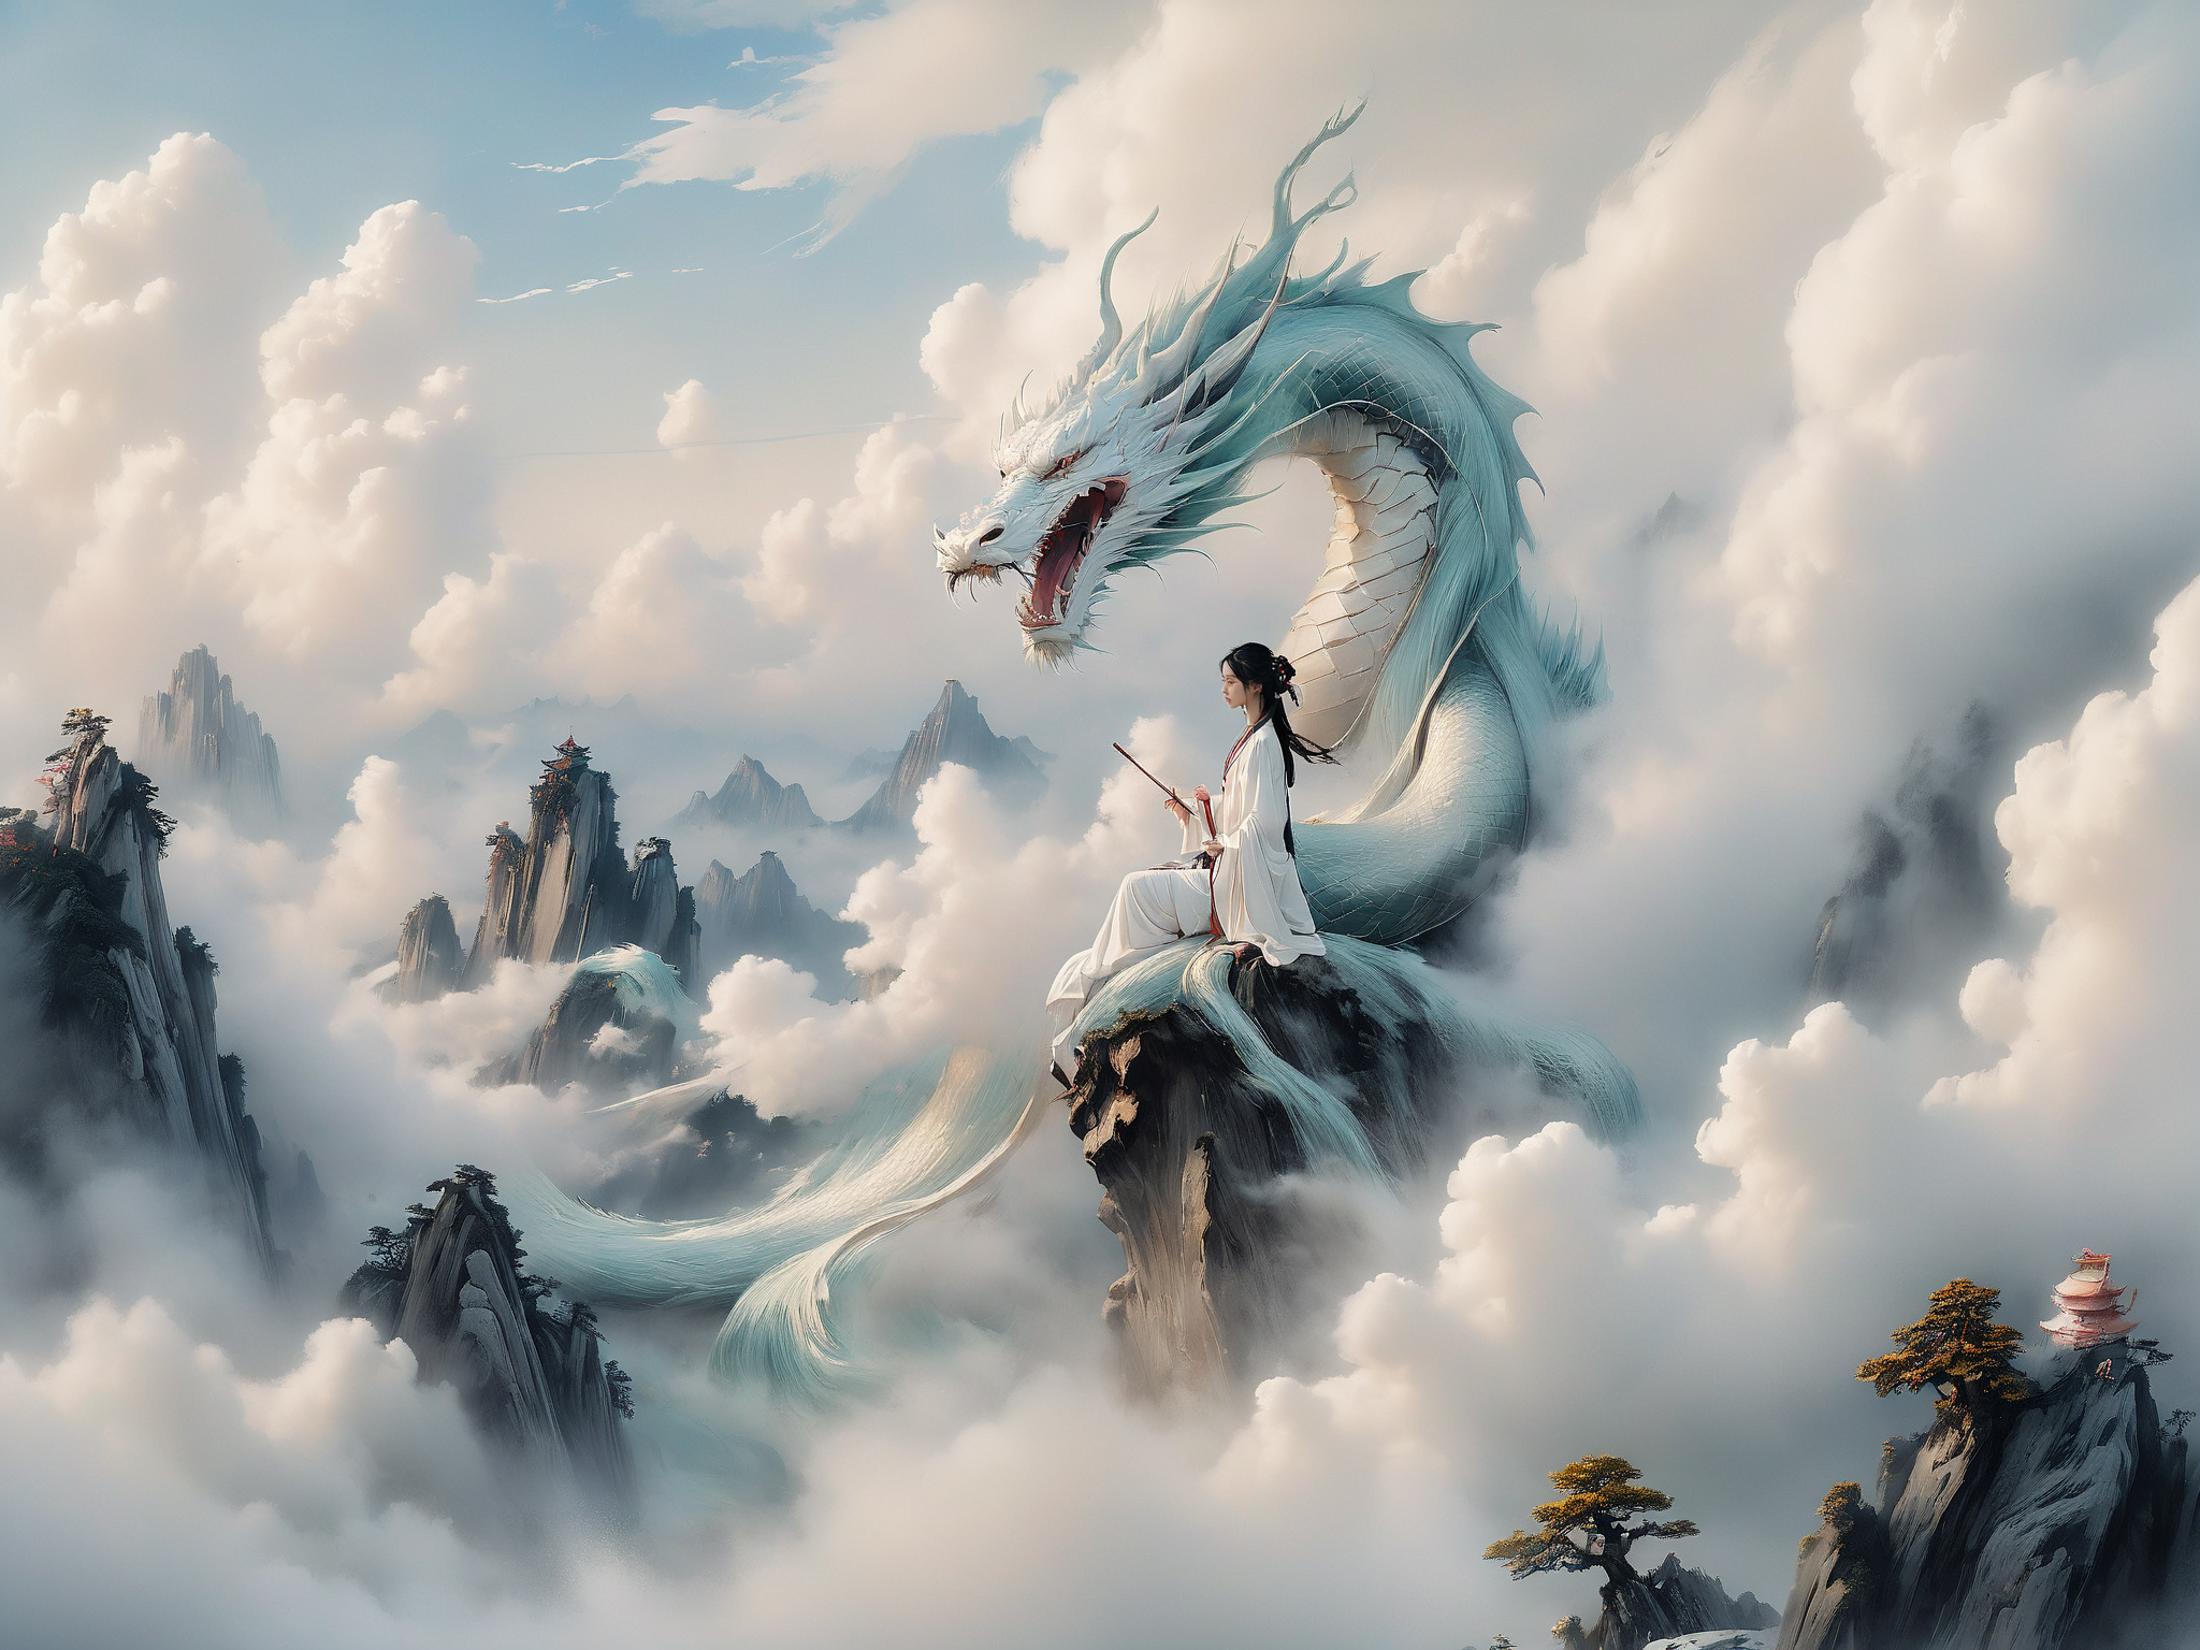 A woman sitting on a rock with a dragon in front of her.